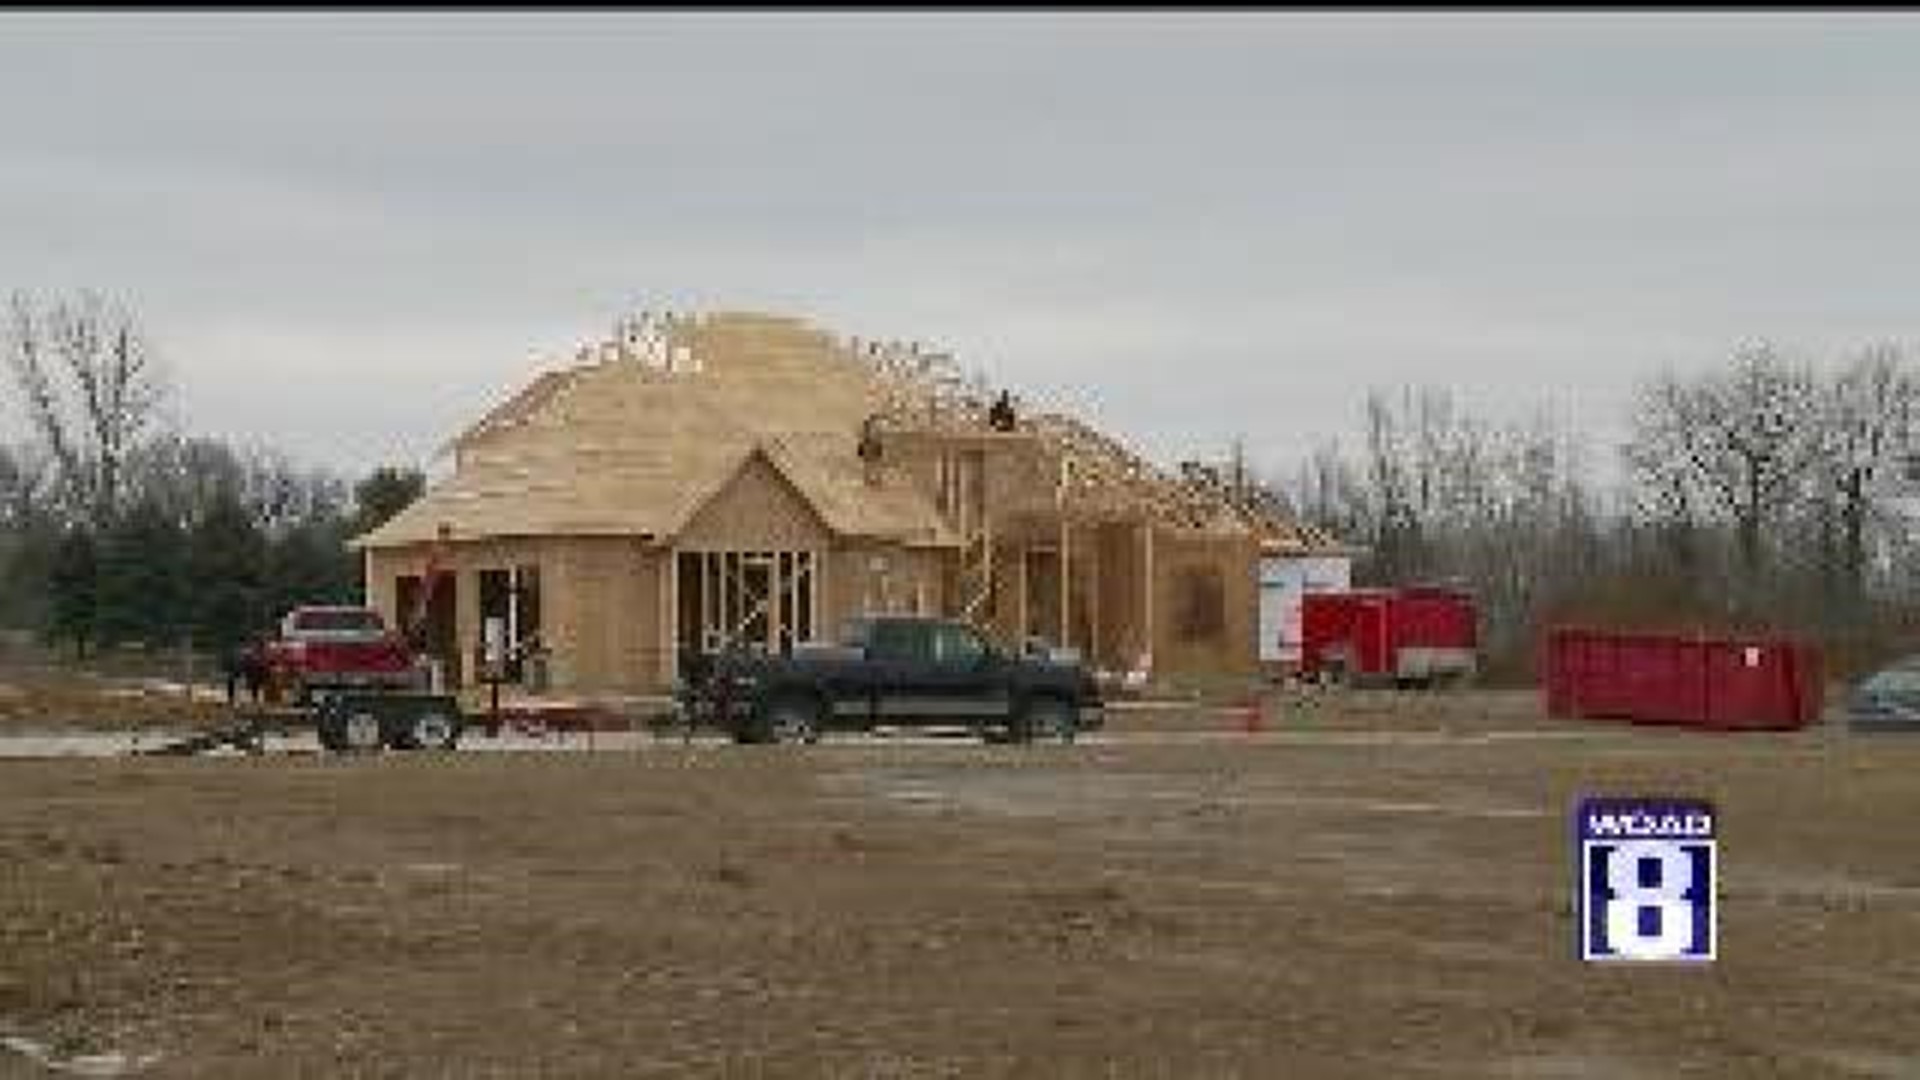 Quad City home construction on the rise